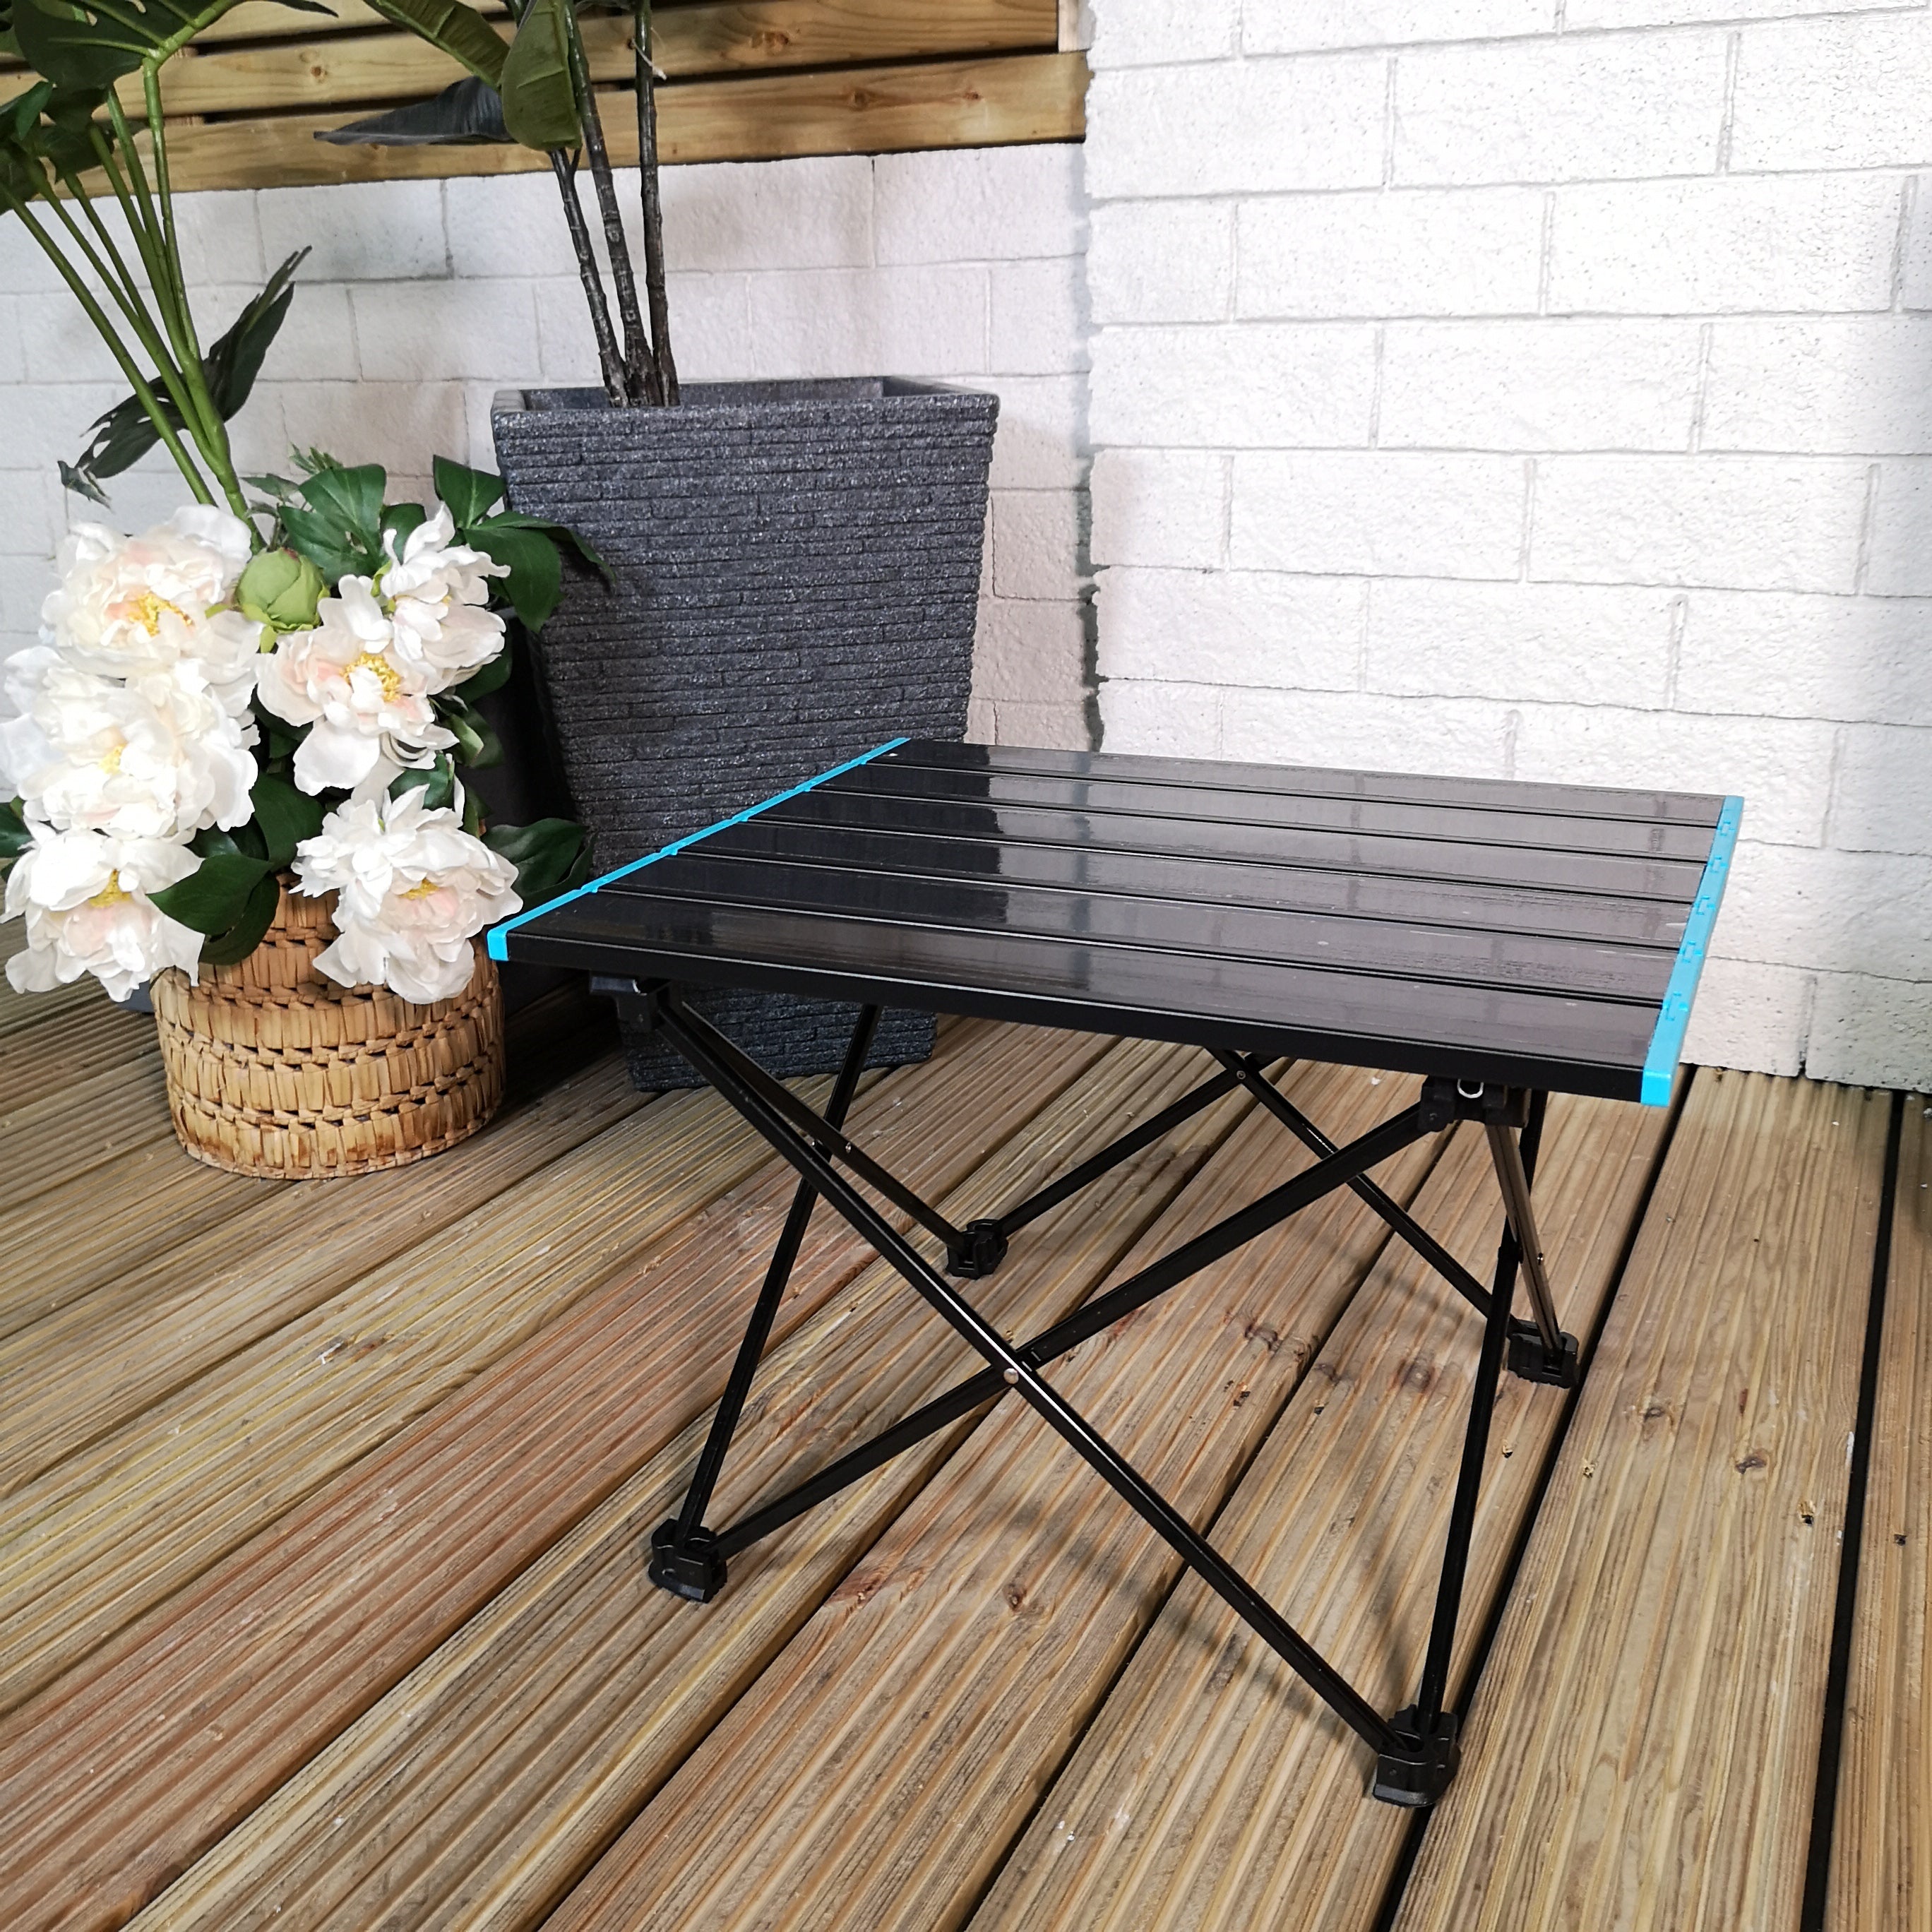 29cm Black Portable Folding Camping Table with Storage Bag